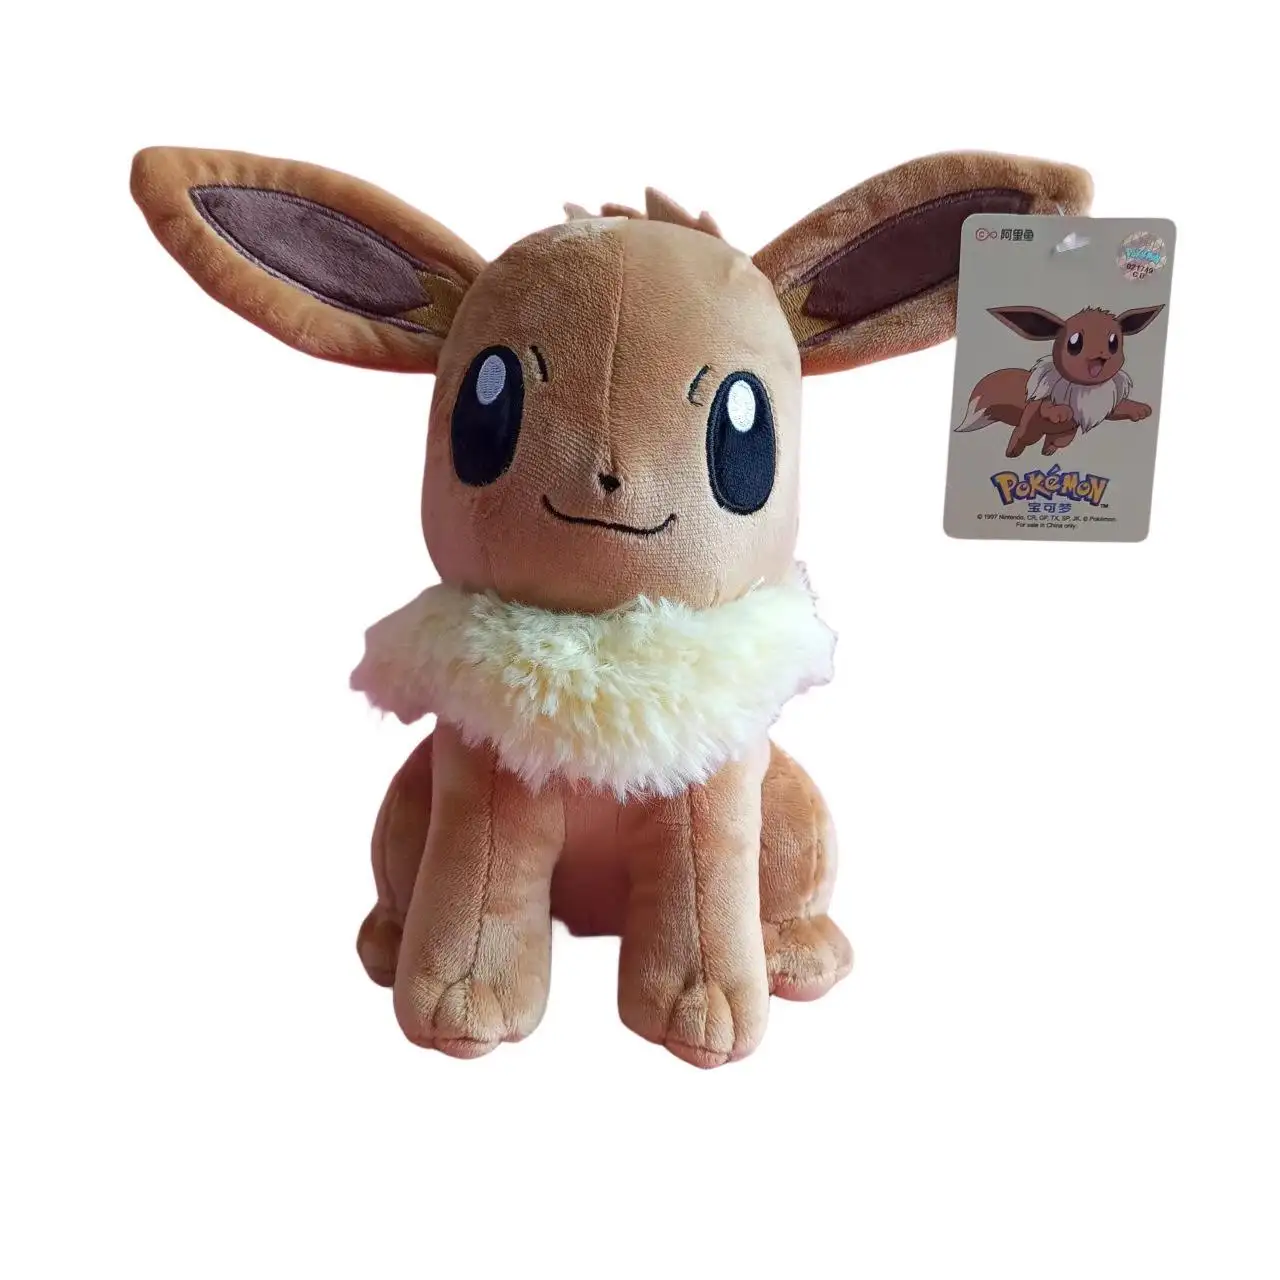 High Quality Official Pokemoned Dolls Best Selling Anime Figure Cartoon Character Plush Toys Kids